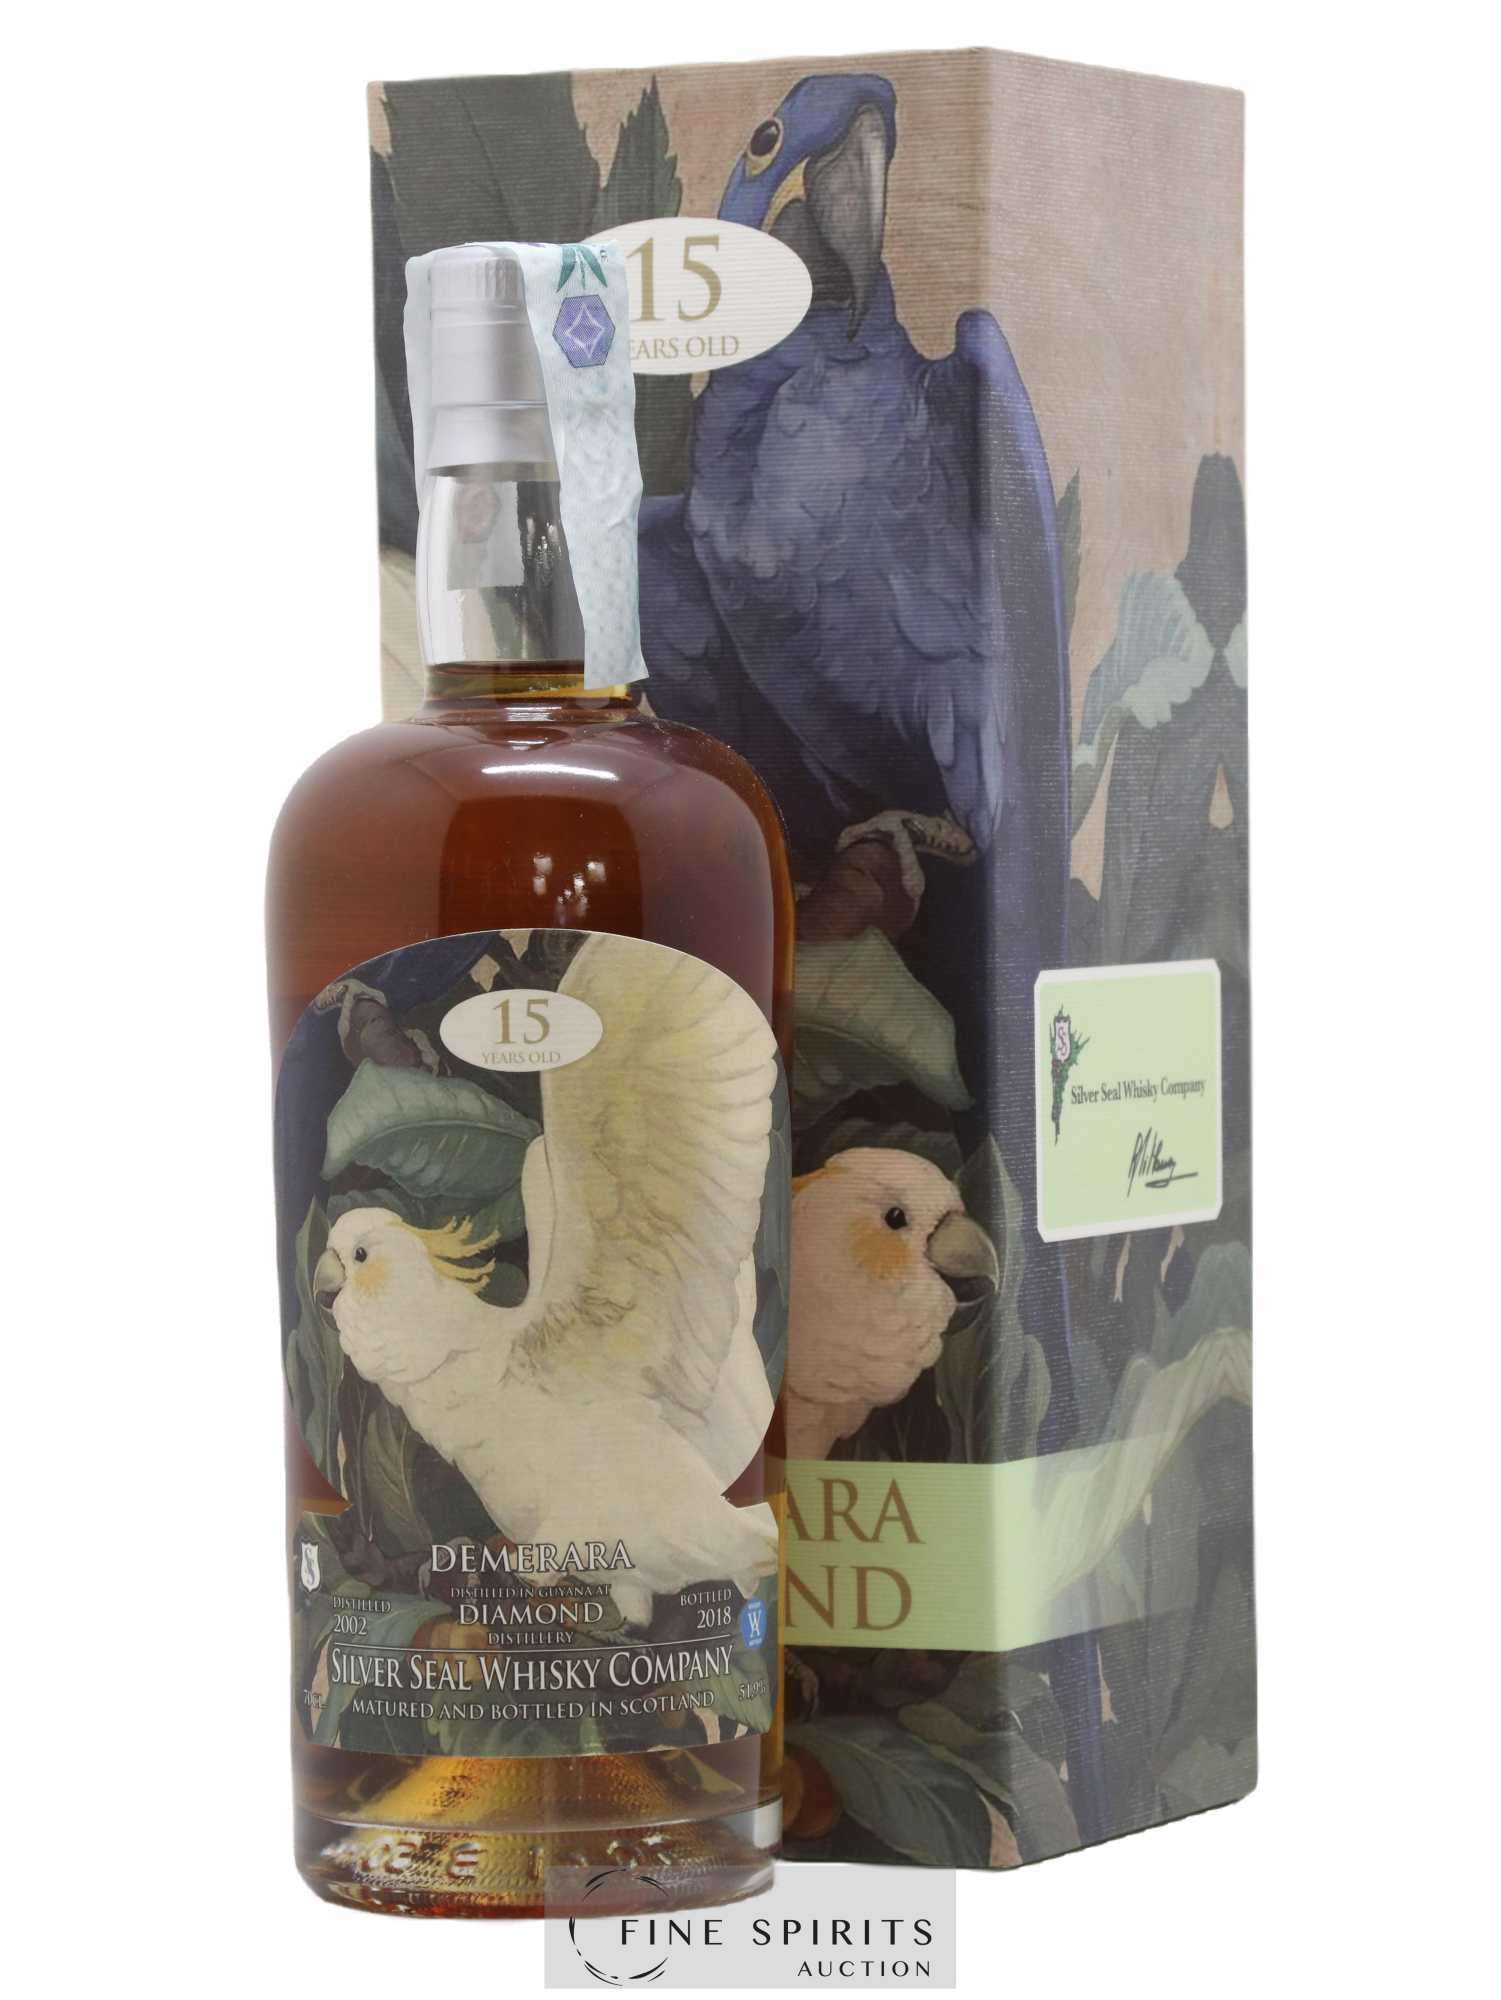 Diamond 15 years 2002 Silver Seal Whisky Company Cask n°91 - One of 220 - bottled 2018 Whisky Antique